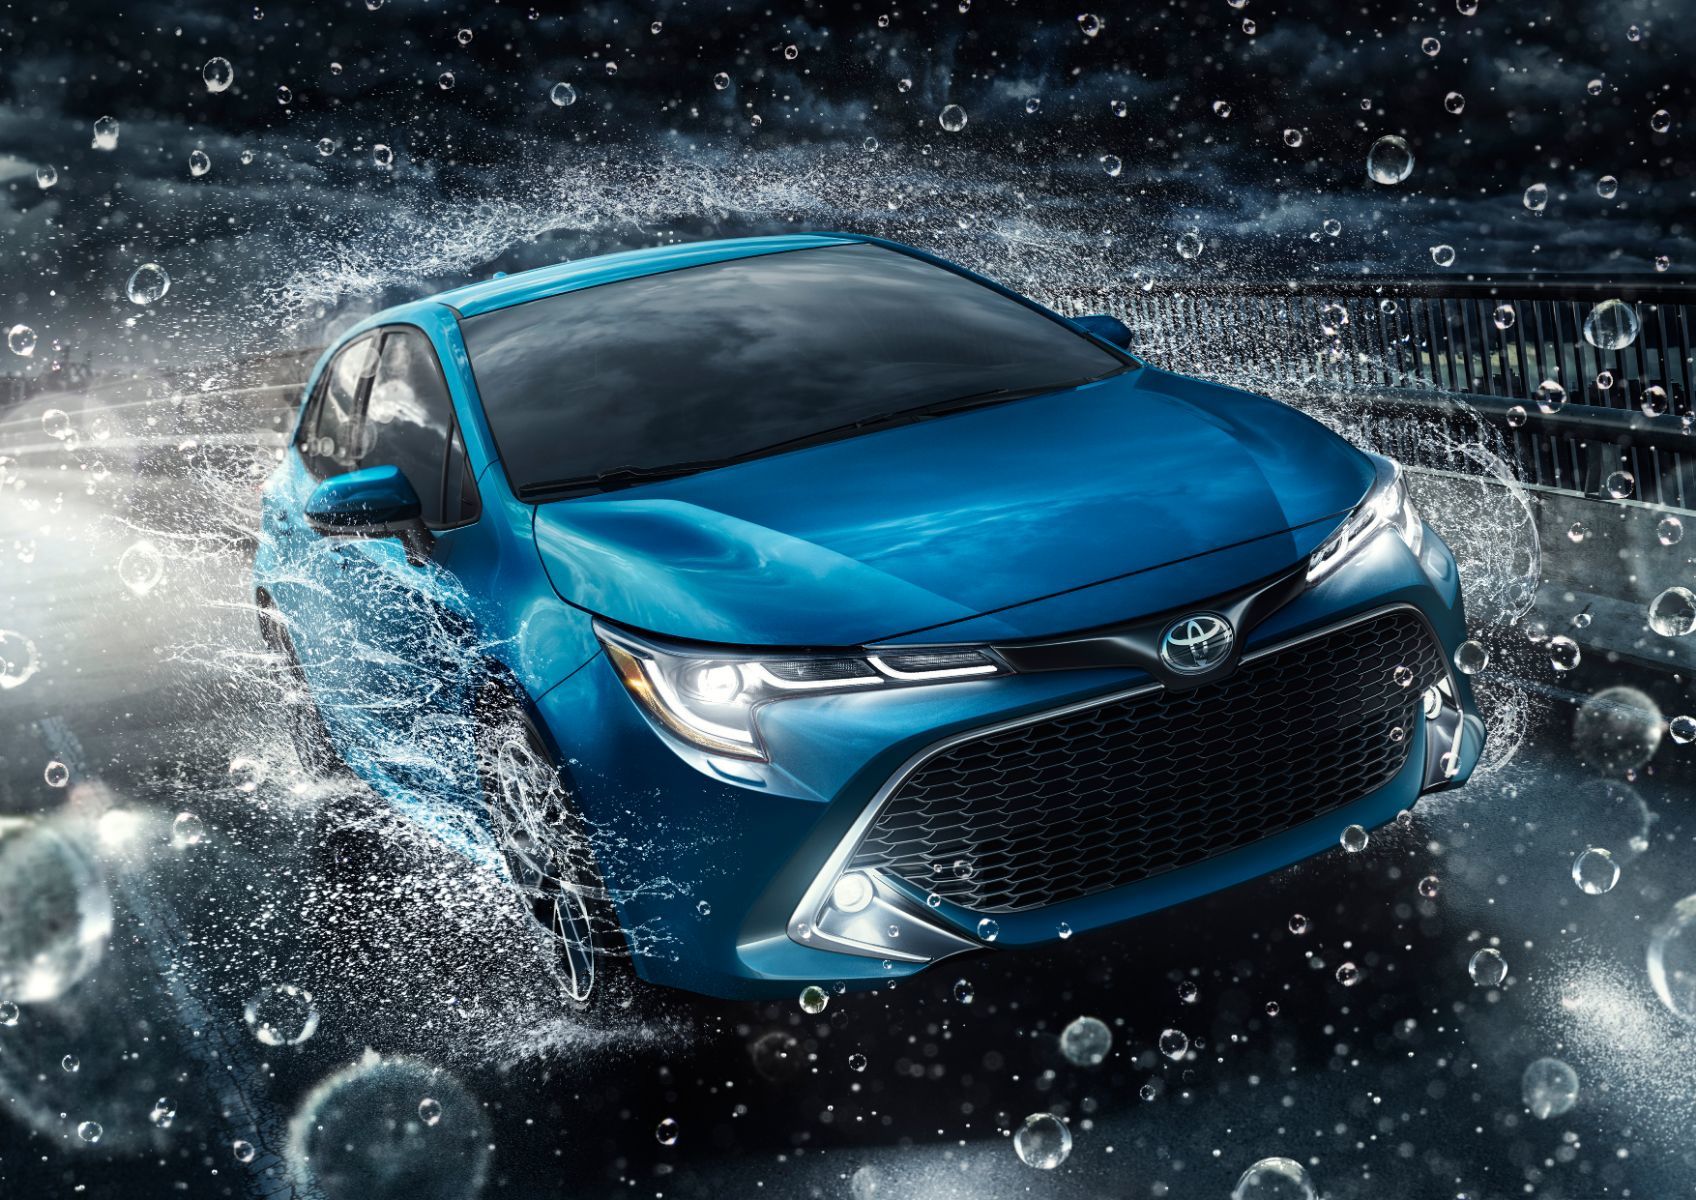 Buying or leasing a 2019 Toyota Corolla at Longueuil Toyota